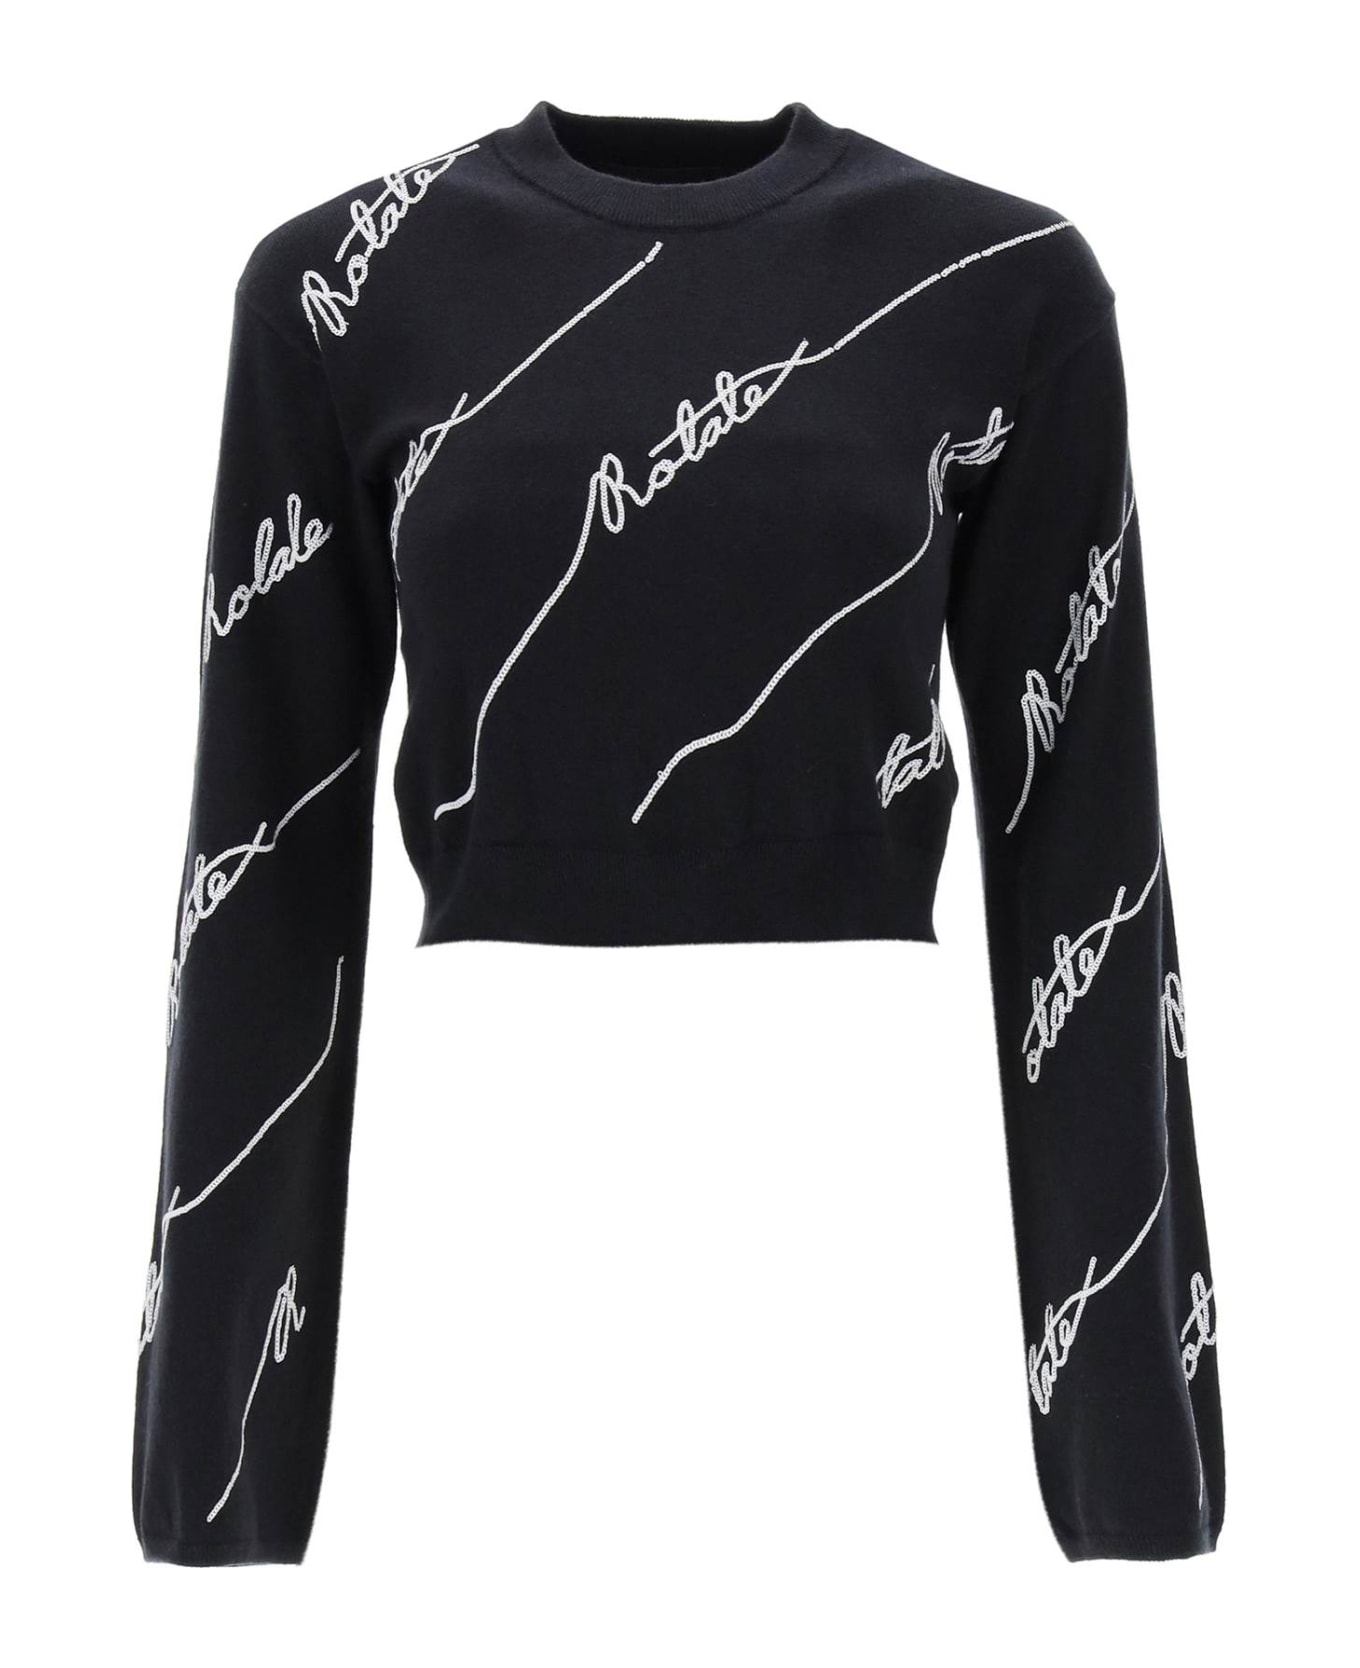 Rotate by Birger Christensen Sequined Logo Cropped Sweater - BLACK (Black)